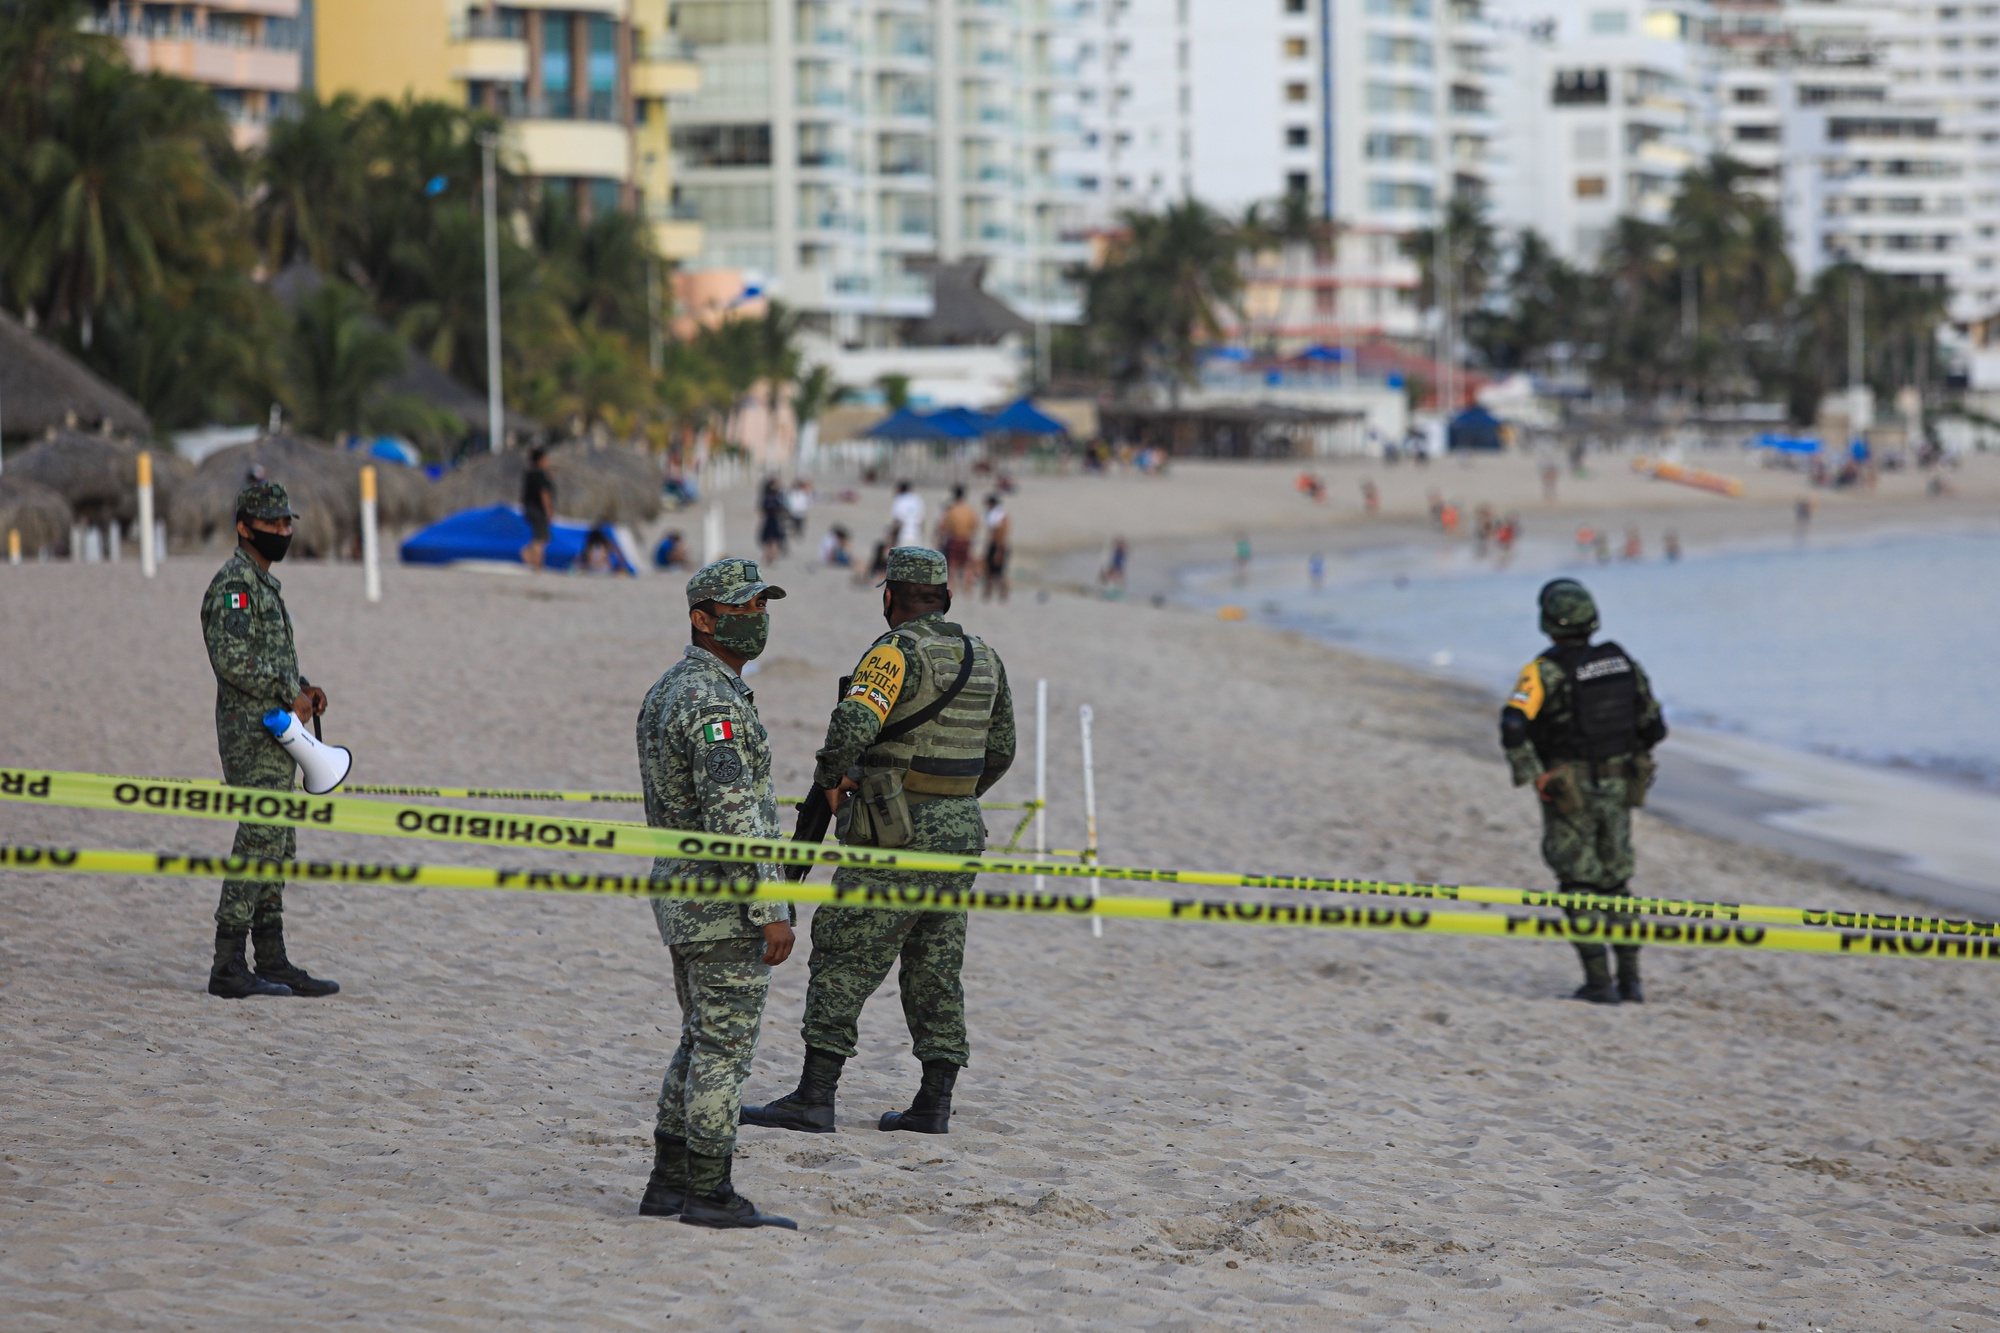 epa08990618 Mexican Army soldiers guard an empty beach, in Acapulco, Guerrero state, Mexico, 05 February 2021. Mexico reported 13,051 new COVID-19 infections in the last 24 hours, for a total of 1,912,871 confirmed infections, according to a statement issued by the Ministry of Health.  EPA/DAVID GUZMAN GONZALEZ